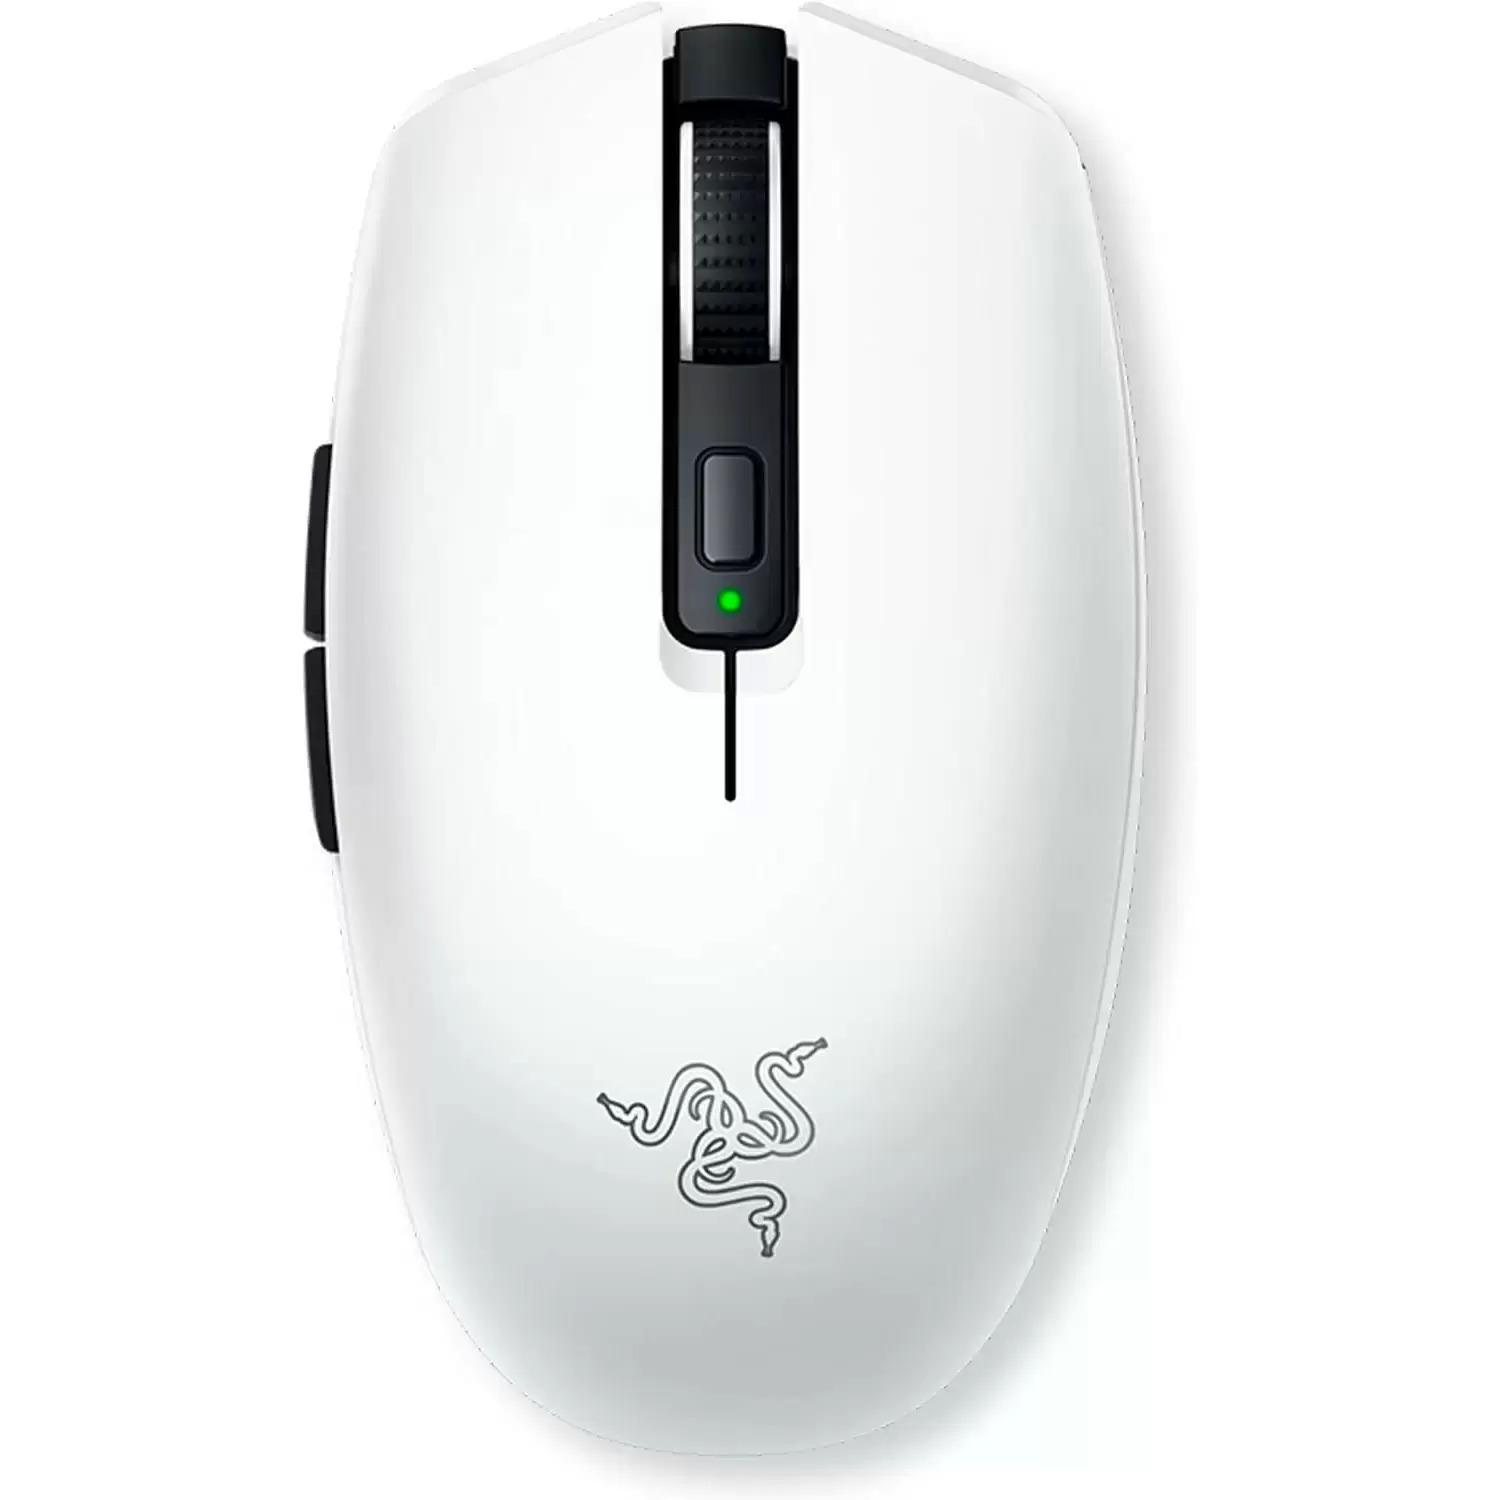 Razer Orochi V2 Wireless Optical Gaming Mouse for $34.99 Shipped